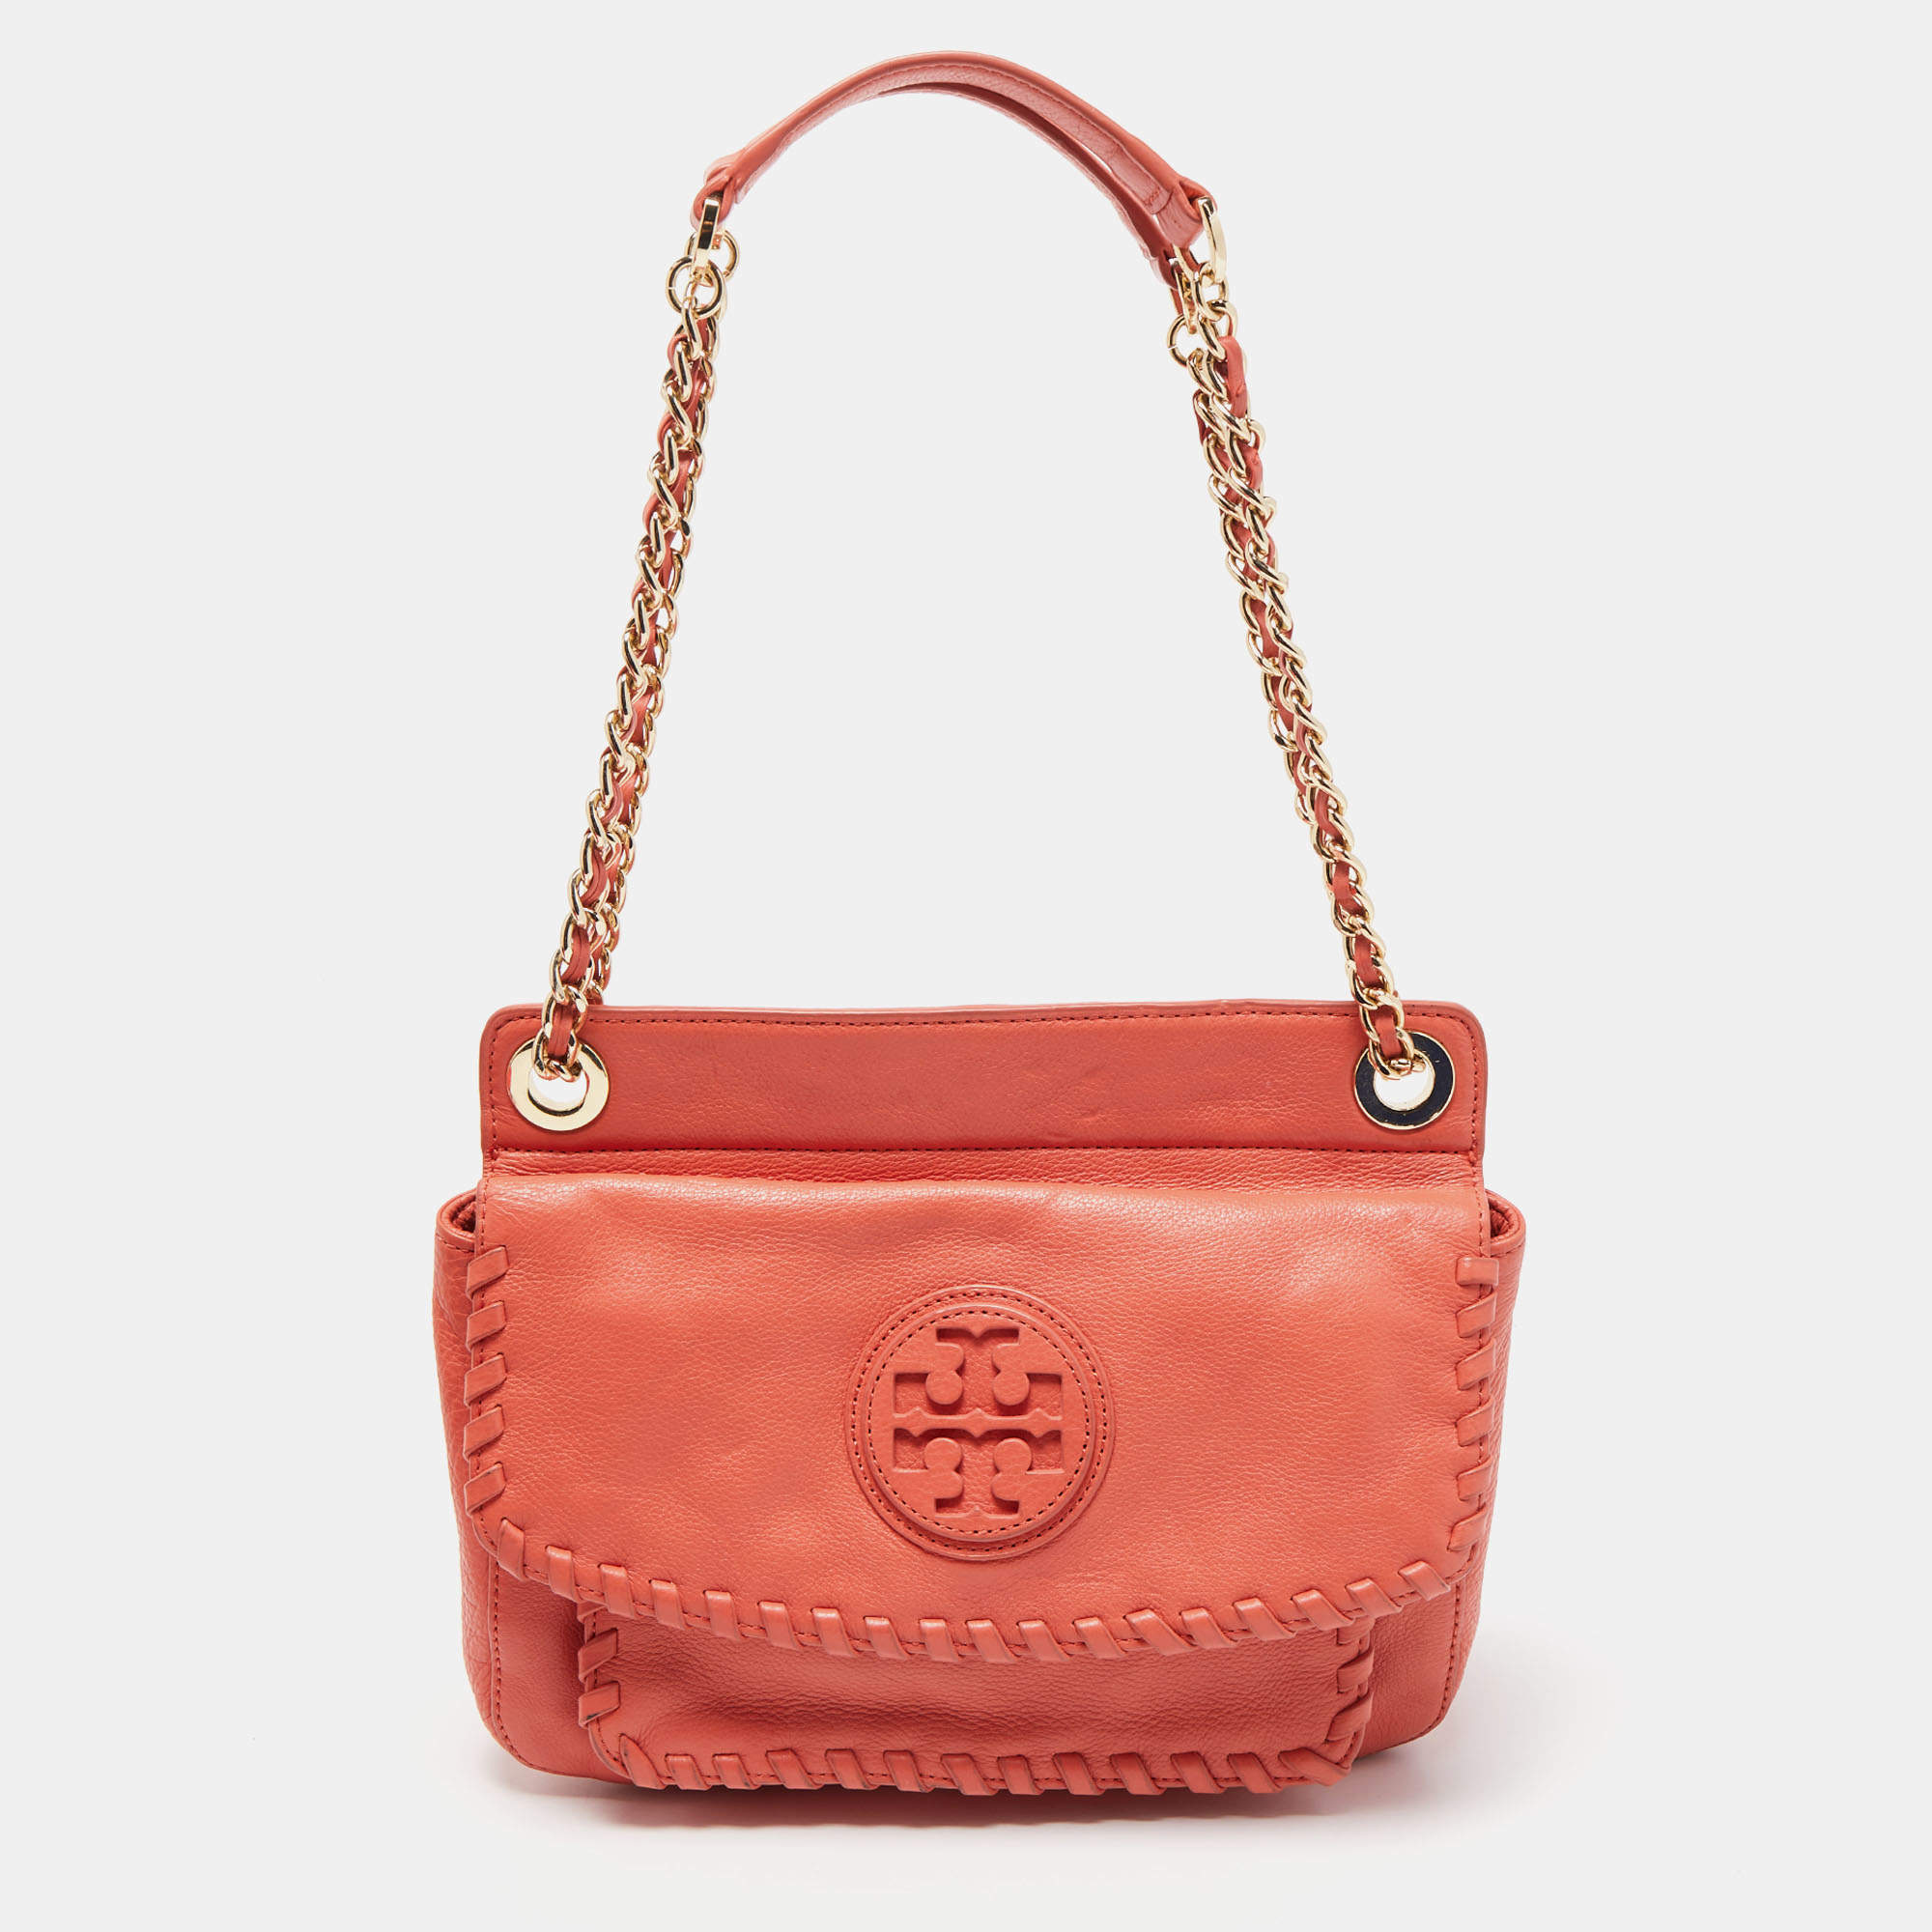 Tory Burch Peach Leather Marion Shoulder Bag Tory Burch | The Luxury Closet